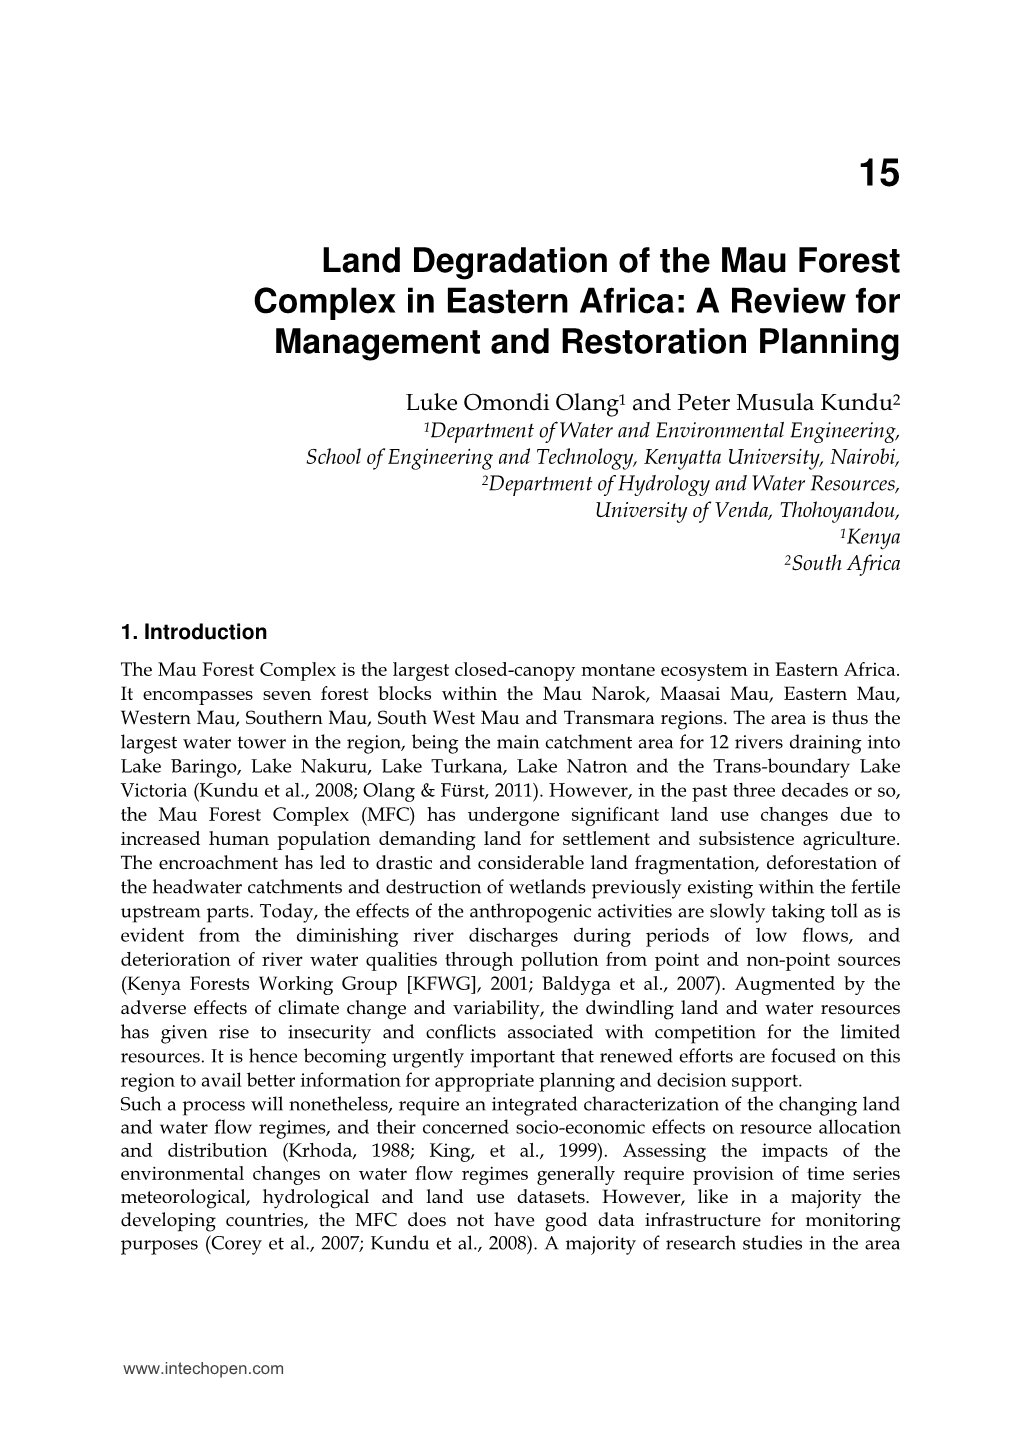 Land Degradation of the Mau Forest Complex in Eastern Africa: a Review for Management and Restoration Planning